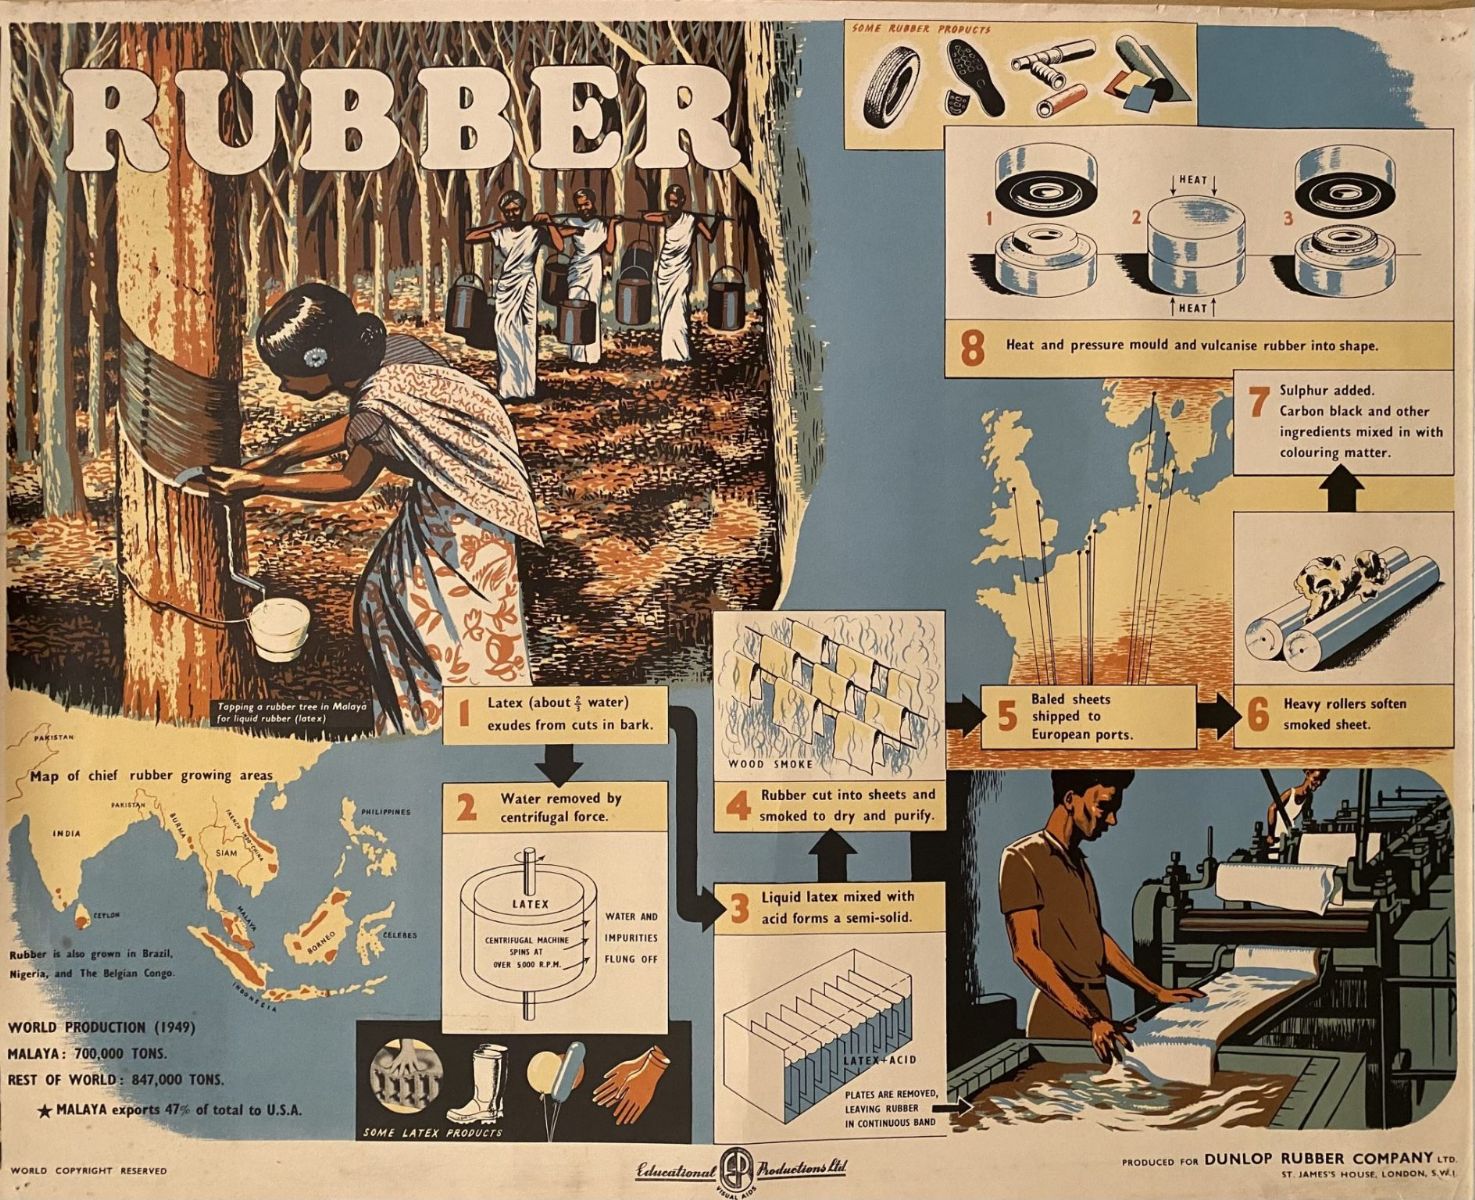 VINTAGE POSTER: Rubber - how it is made and sold